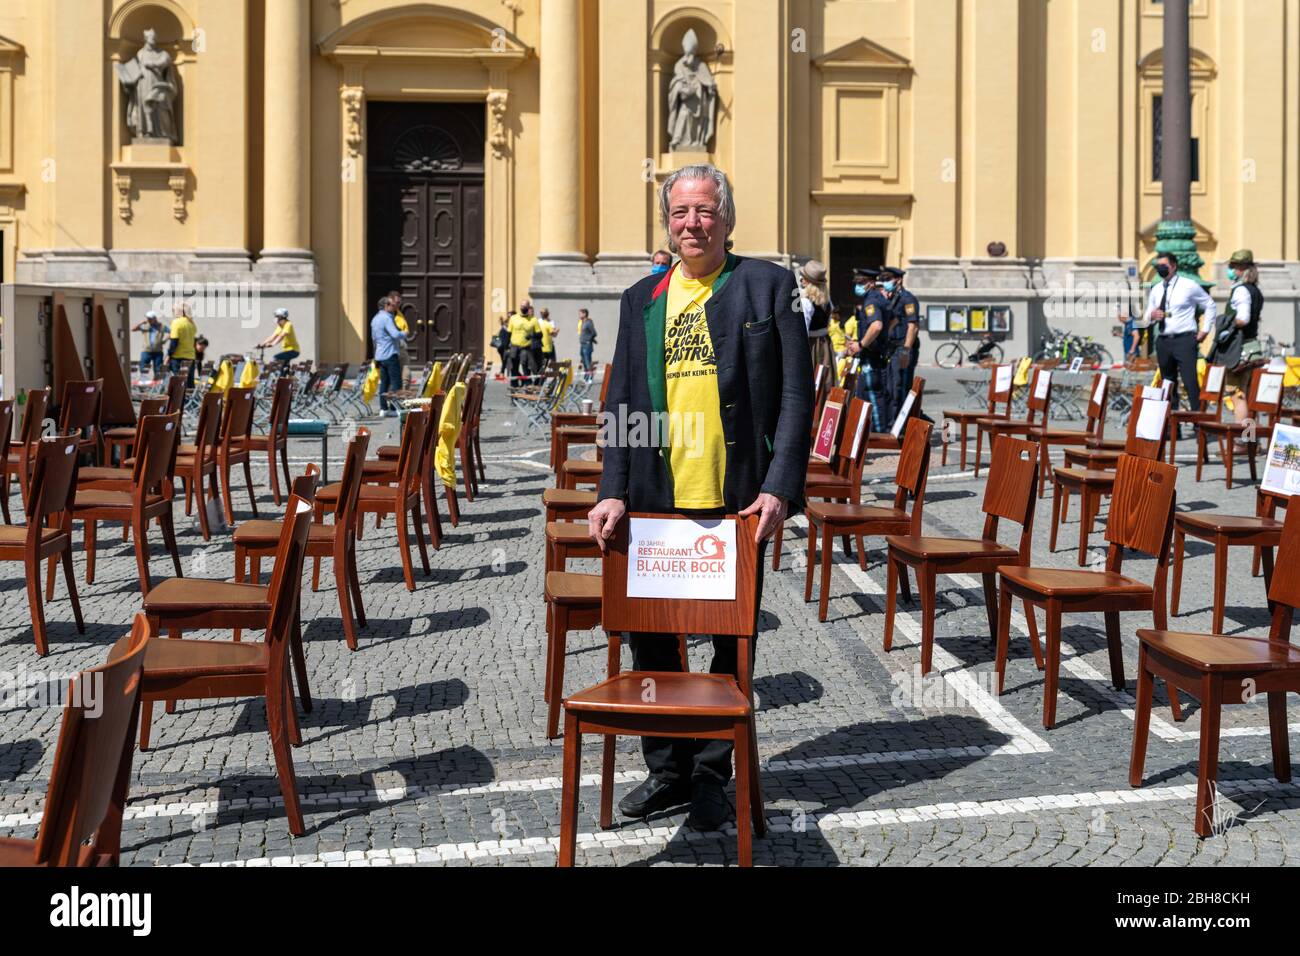 Munich. 24th Apr, 2020. Munich 24. April 2020 | An employee of the renowned restaurant 'Blauer Bock' at a rally to support the gastronomy. The catering trade is particularly hard hit by the restrictions on going out and the ban on contact. Credit: Thomas Vonier/ZUMA Wire/Alamy Live News Stock Photo